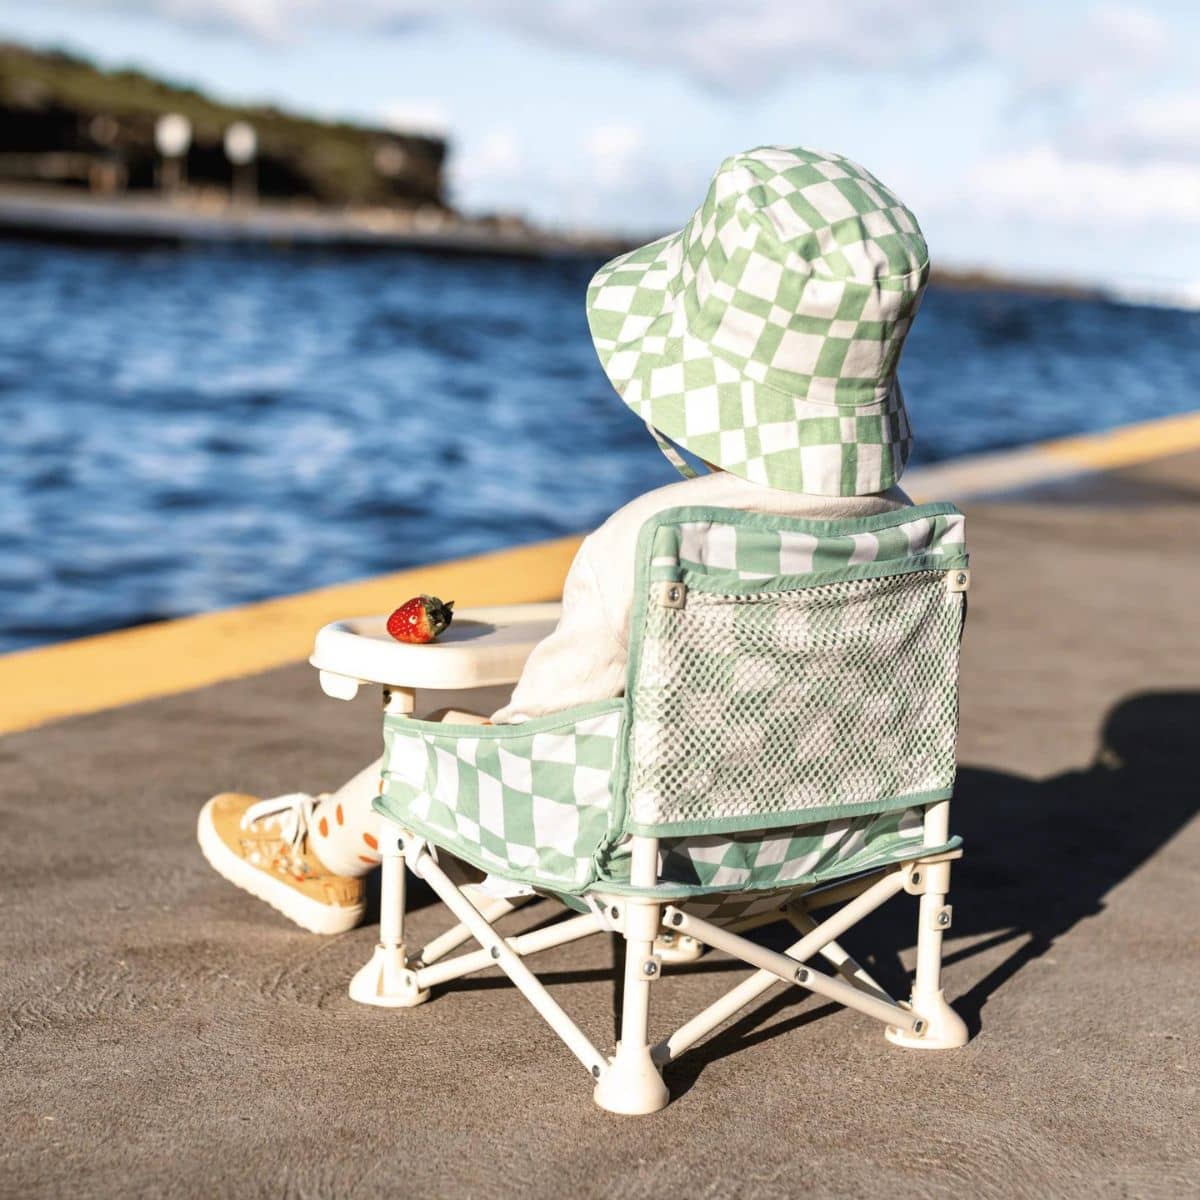 Izimini Outdoor Baby Chair - Parker